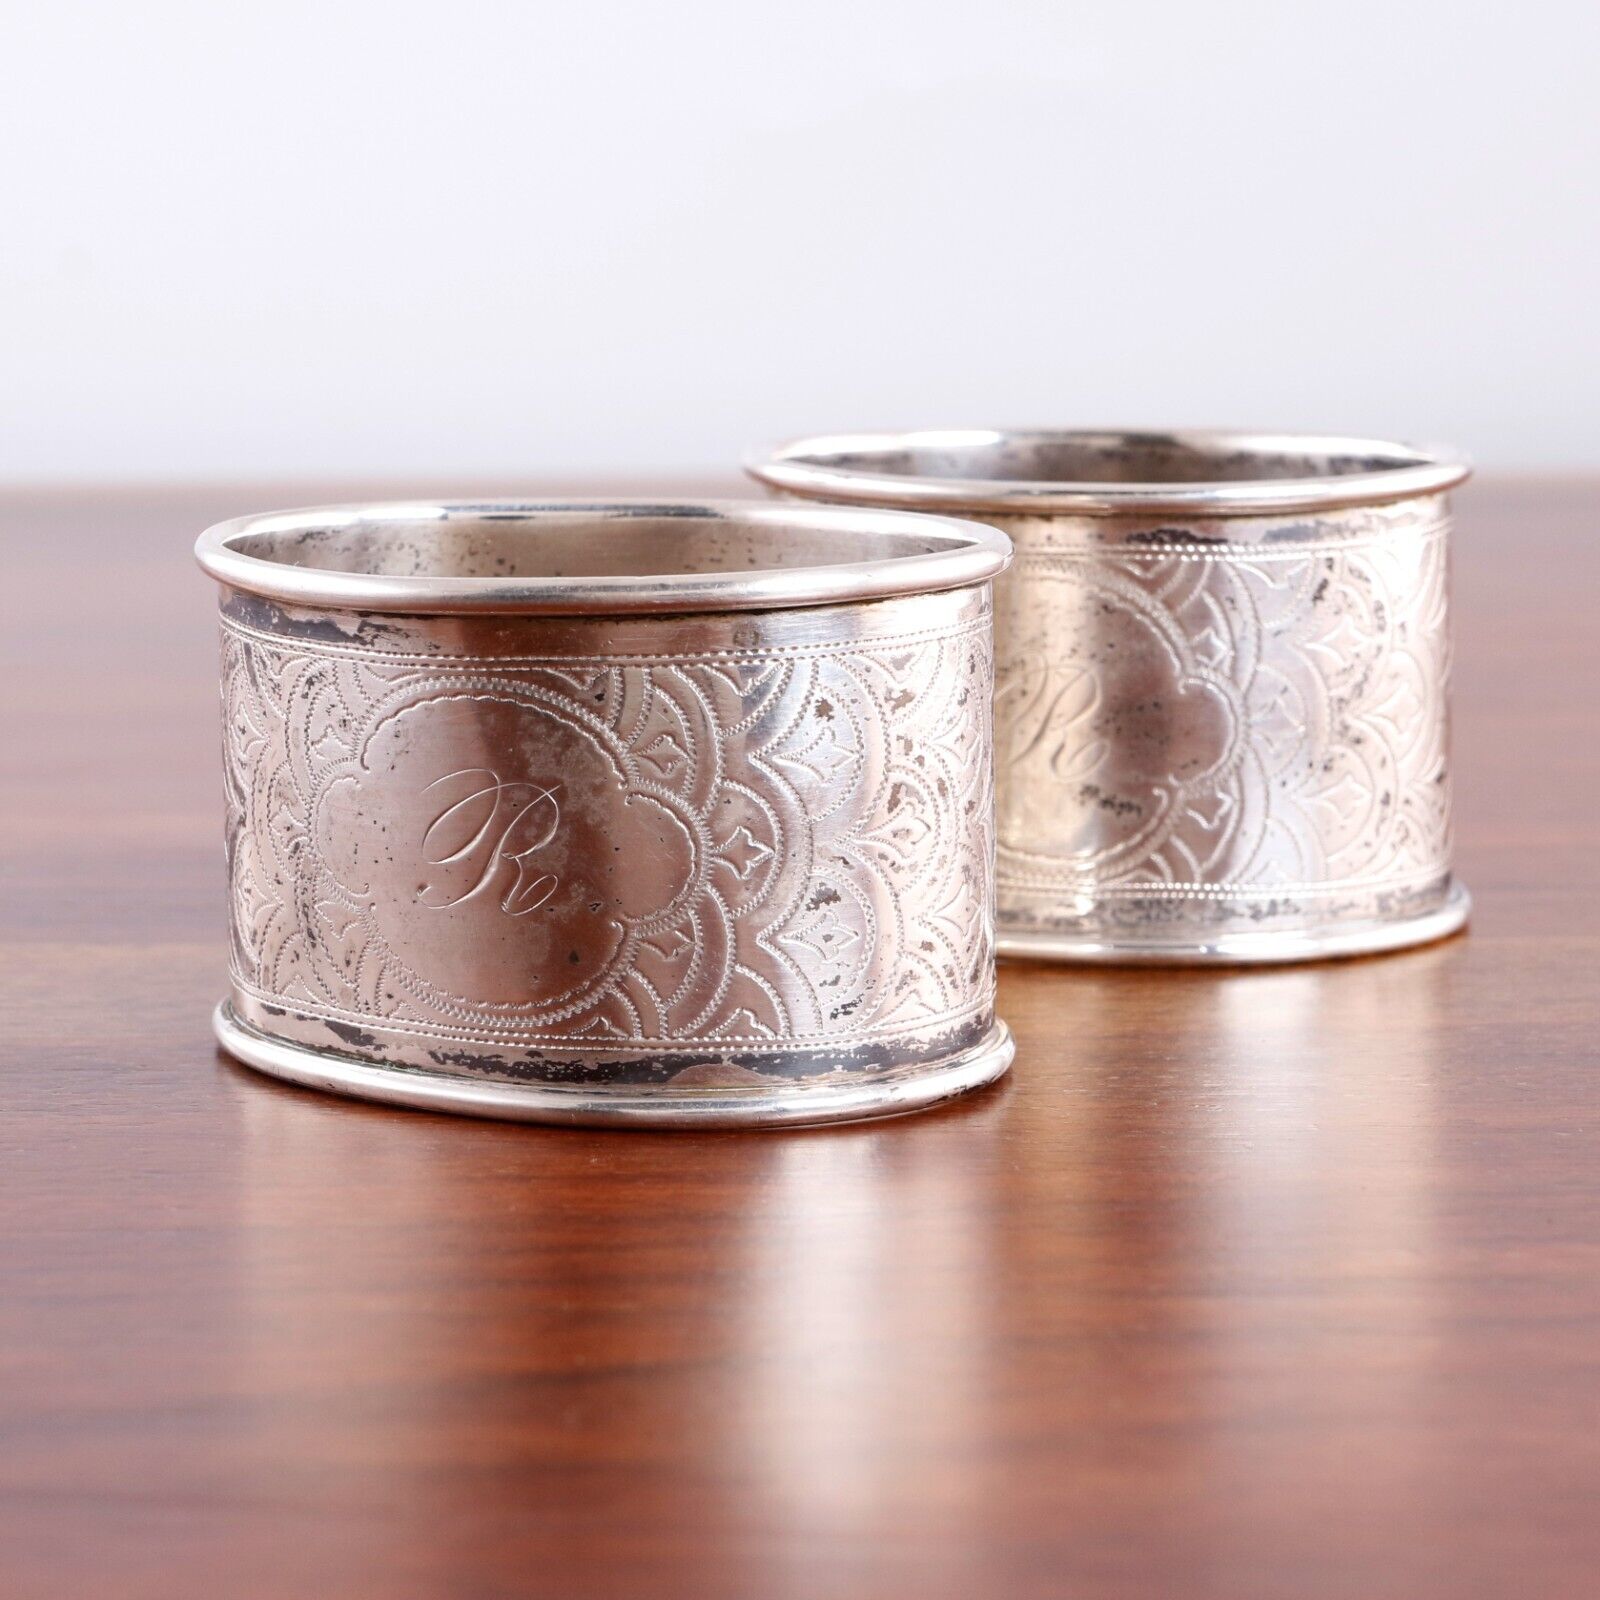 Antique Valuations: 2 LARGE AMERICAN AESTHETIC COIN SILVER NAPKIN RINGS ENGINE TURNED MONOGRAM R